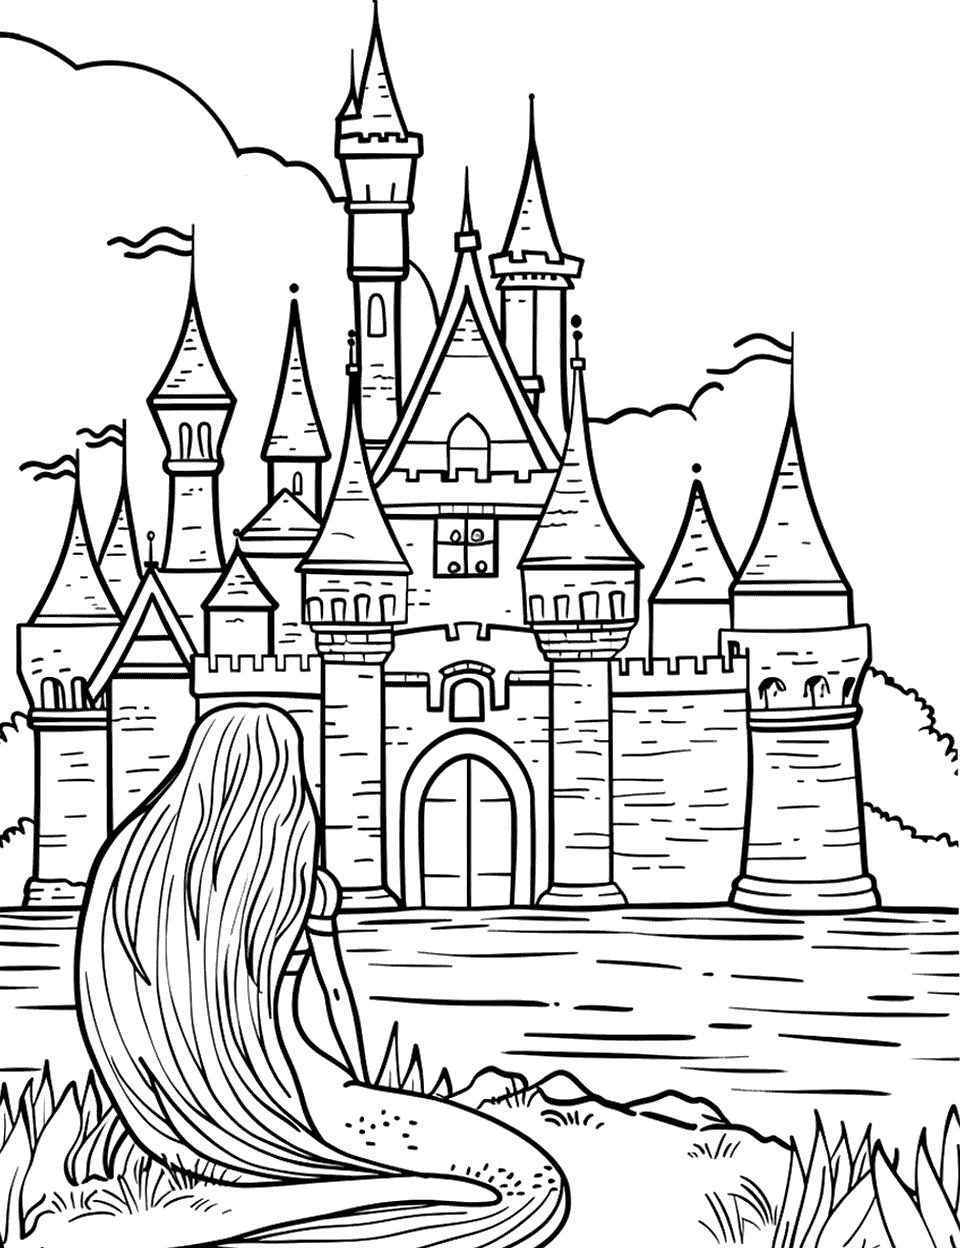 Mermaid by the Castle Moat Coloring Page - A single mermaid sitting by a castle moat, with the castle in the background.